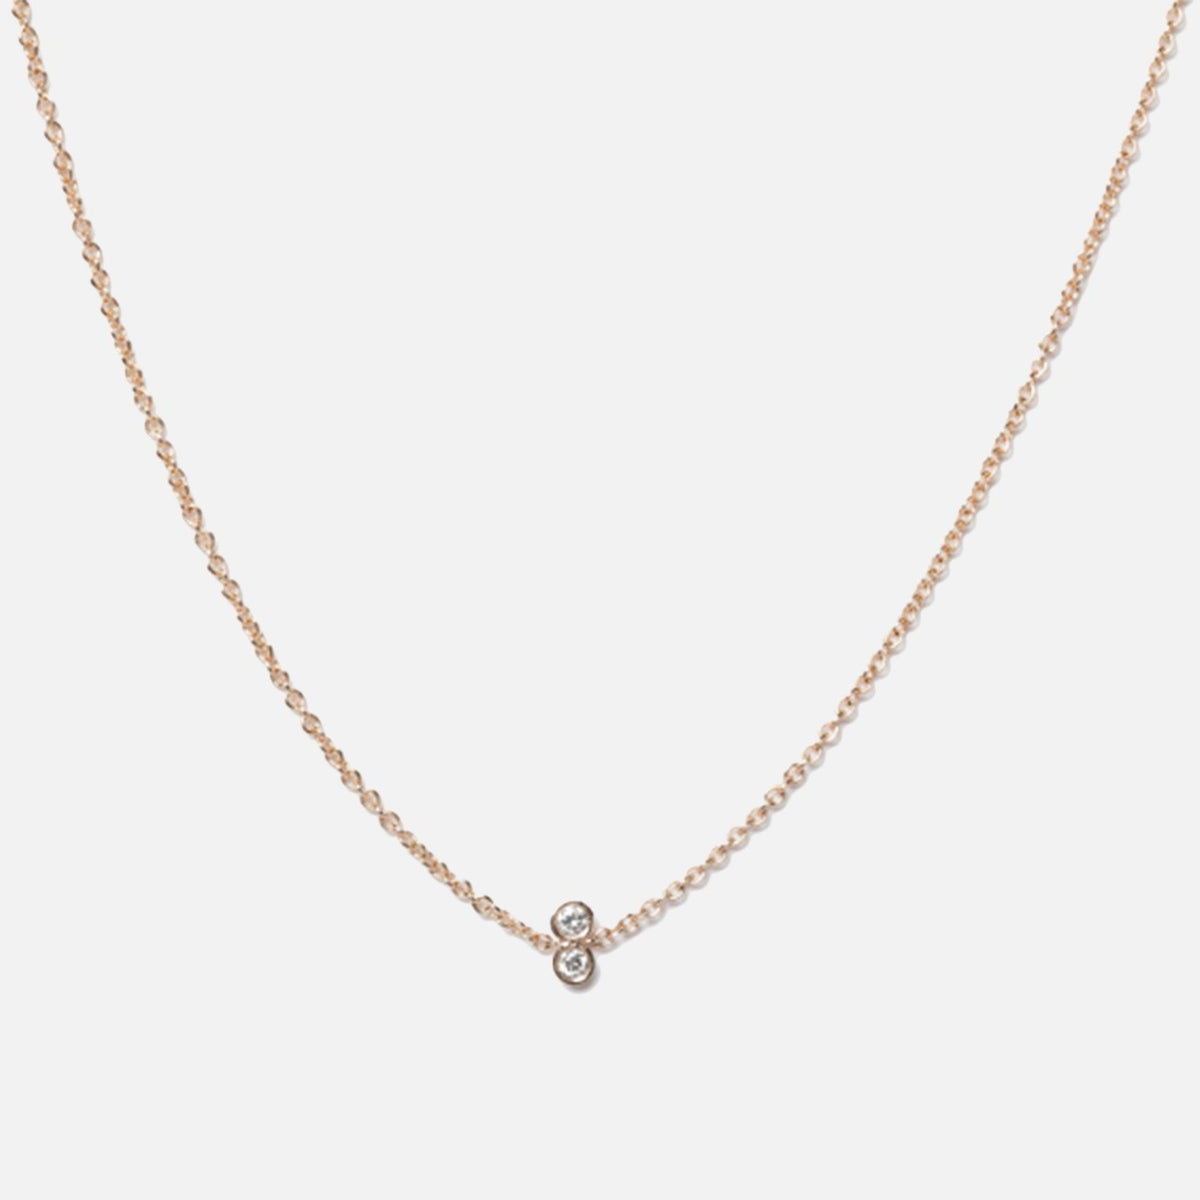 Twin Diamond Necklace - A.M. Thorne - At Present